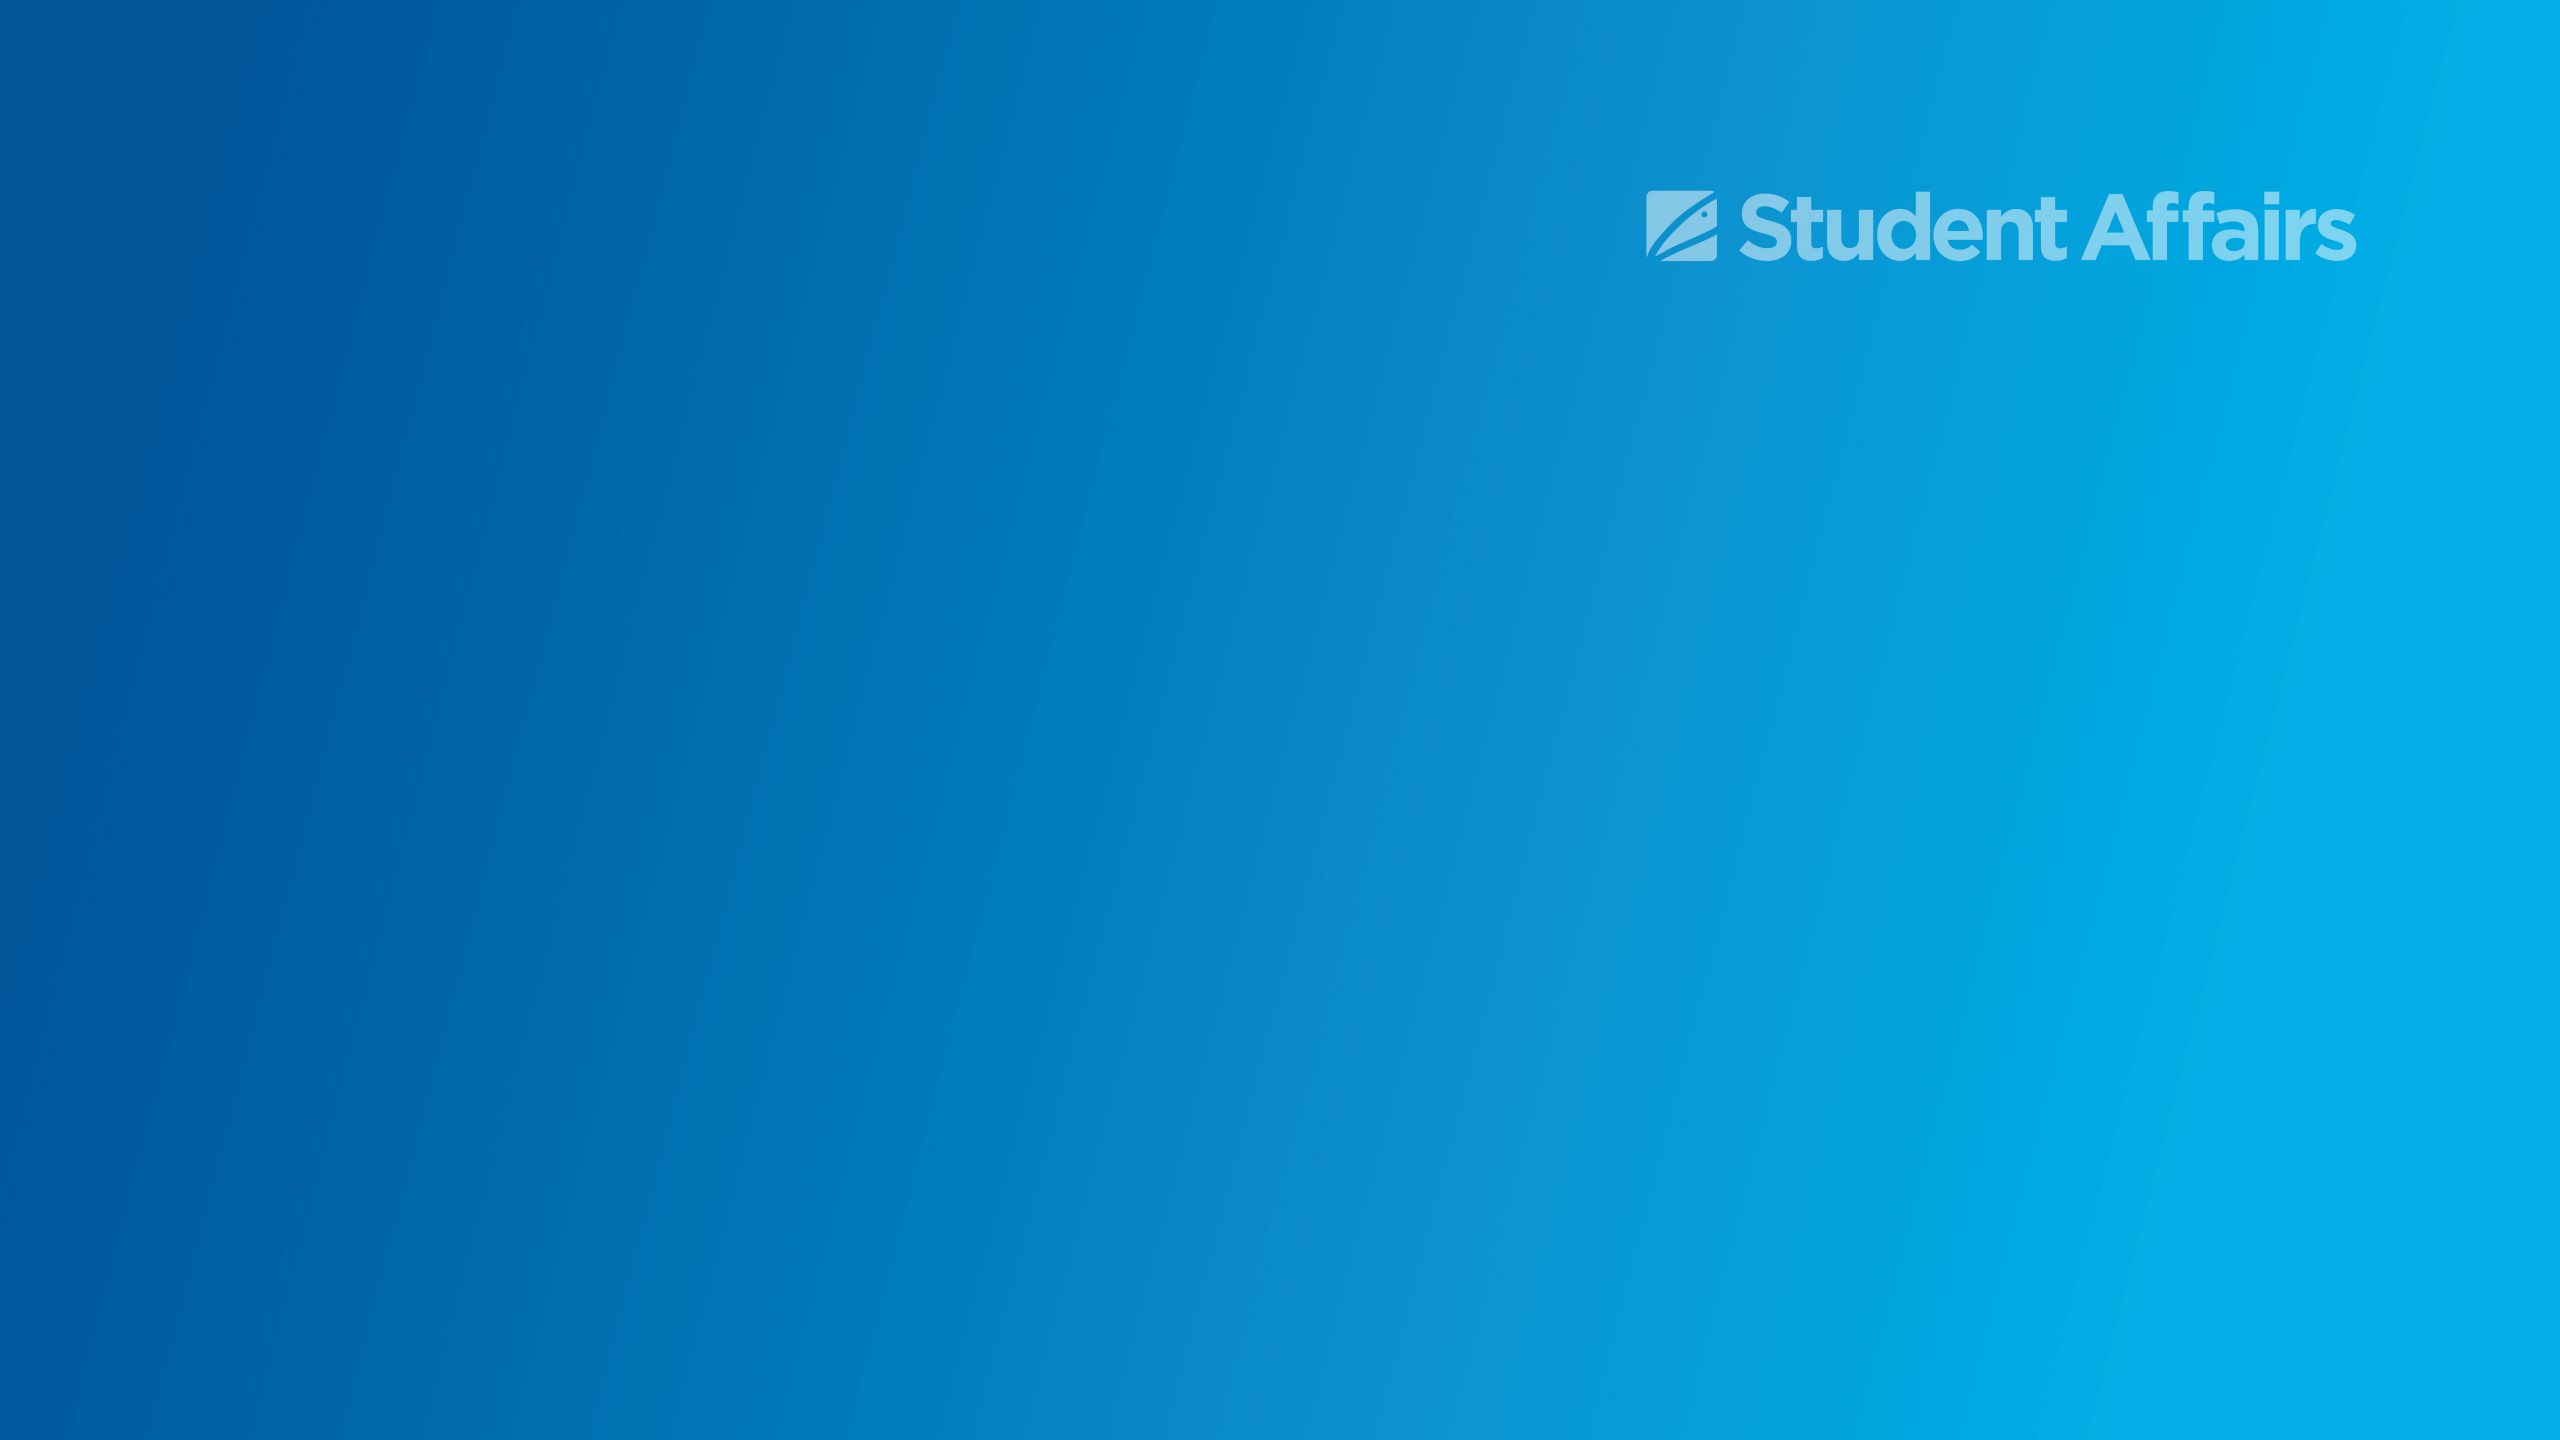 Blue gradient background with transparent white Student Affairs graphic in upper right corner